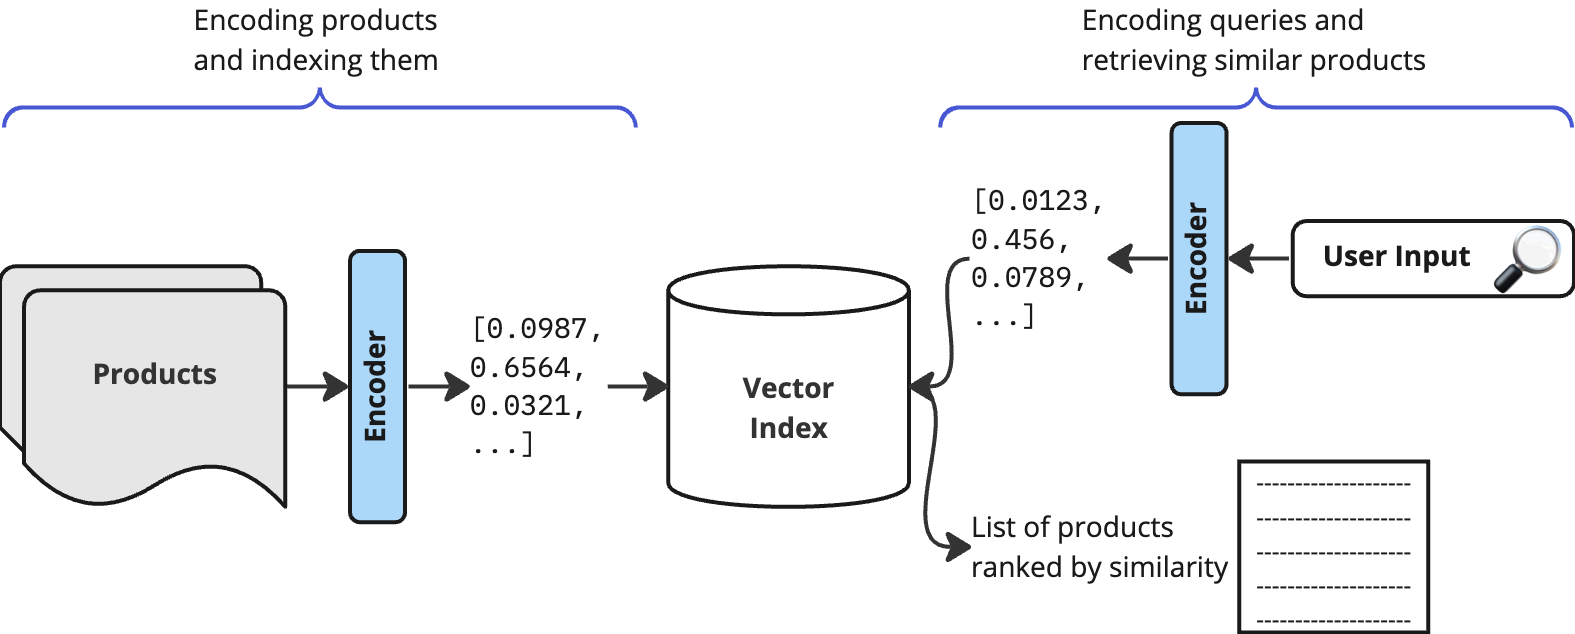 The building blocks that are used to apply vector search in e-commerce